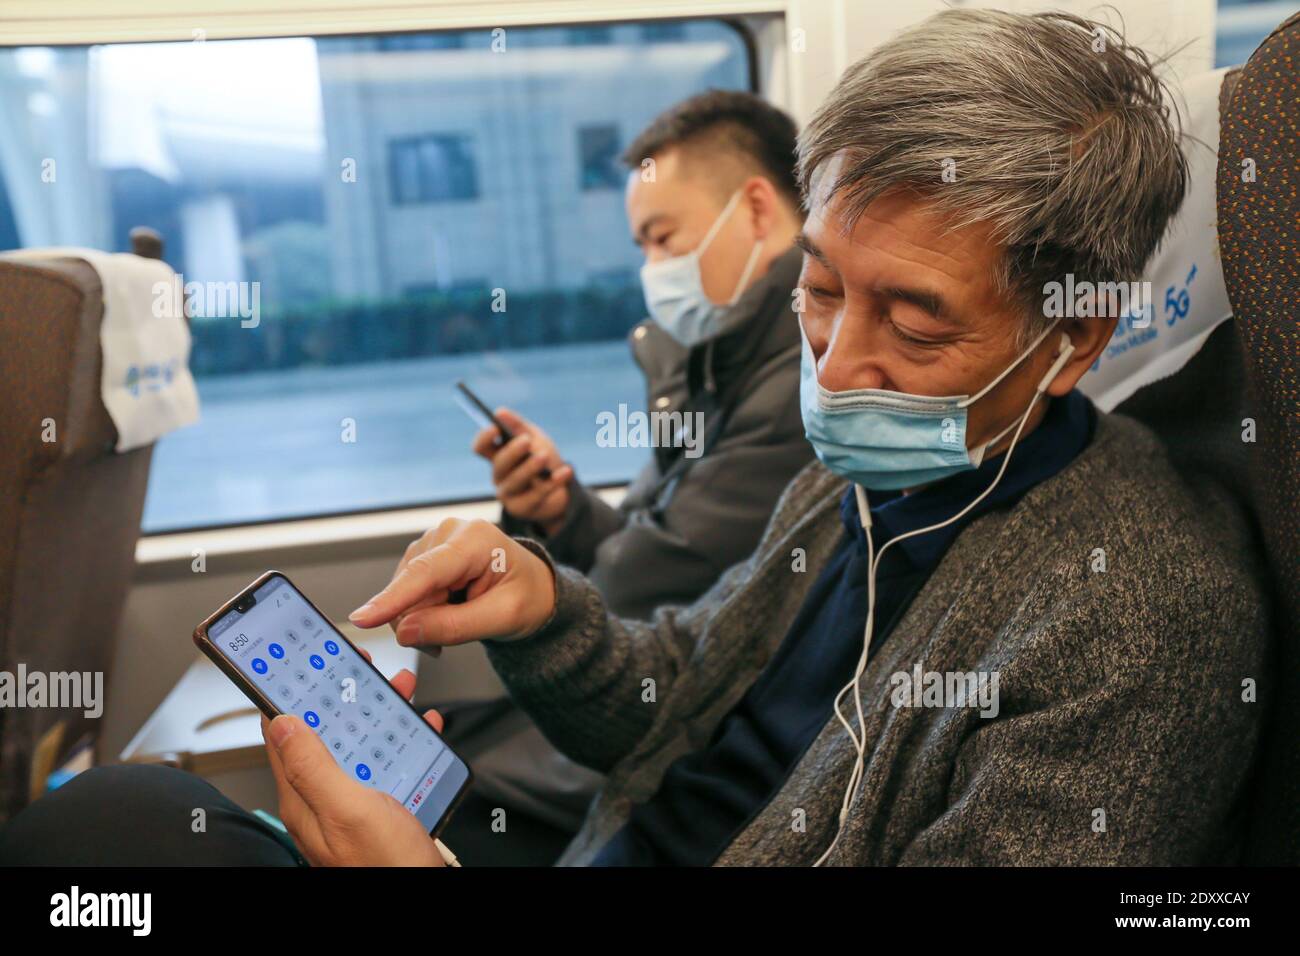 Shanghai, China. 24th Dec, 2020. A passenger mutes his cellphone on the 'quiet car' of G2 bullet train of the Beijing-Shanghai high-speed railway, which links Beijing, capital of China, and east China's Shanghai, on Dec. 24, 2020. Some high-speed trains in China have piloted 'quiet cars' for passengers who opt for a quiet and undisturbed travel experience. The 'quiet car' is often the No. 3 carriage on the train, with onboard videos muted and announcements made at a lower volume. Doors at the ends of the carriage will be closed to reduce noise from the vestibule. Credit: Xinhua/Alamy Live News Stock Photo